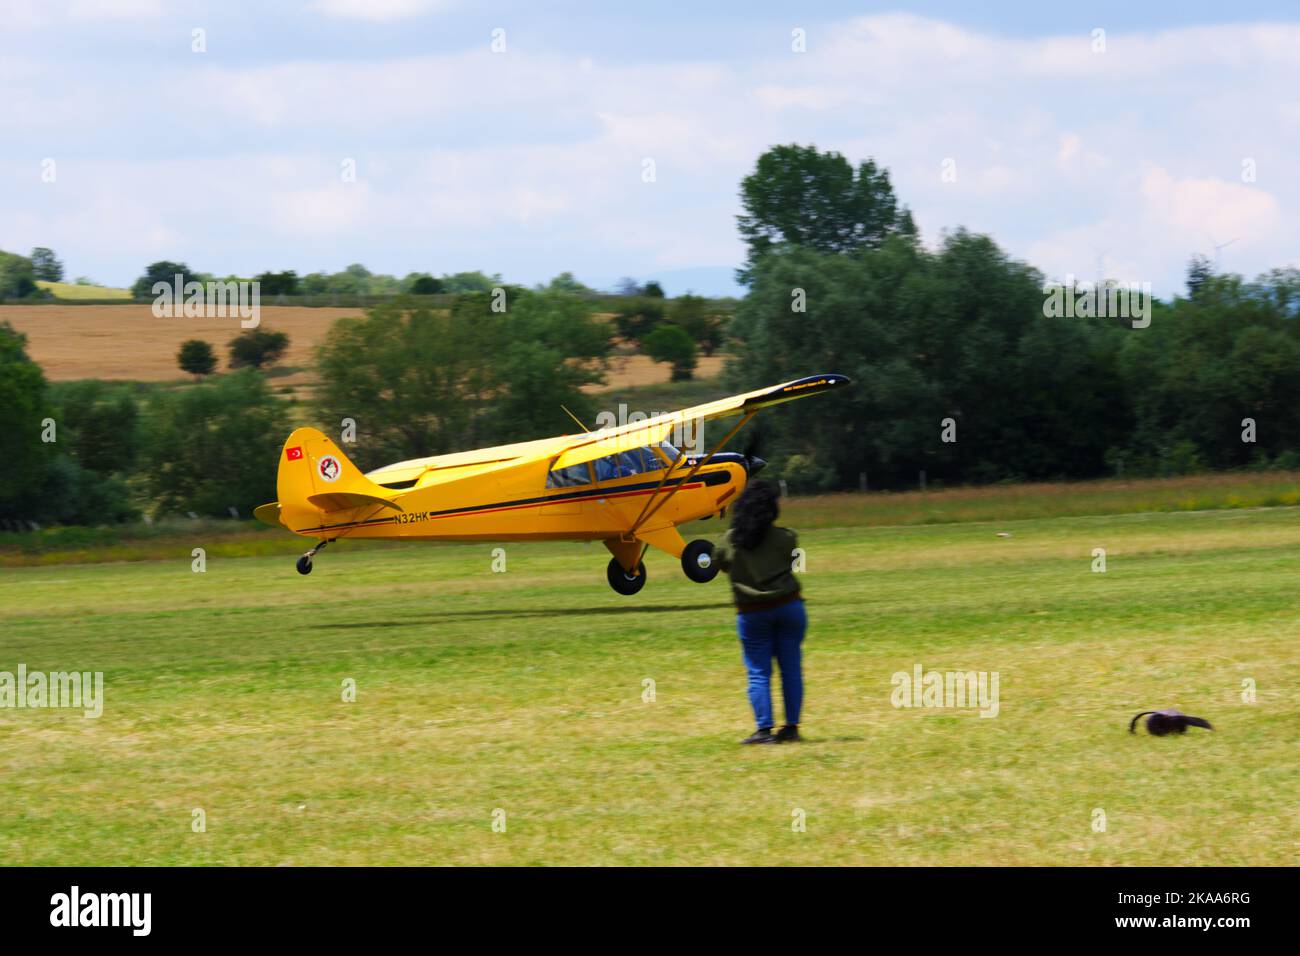 Yellow plane waiting on grass with people nearby in a sunny day outdoor Stock Photo